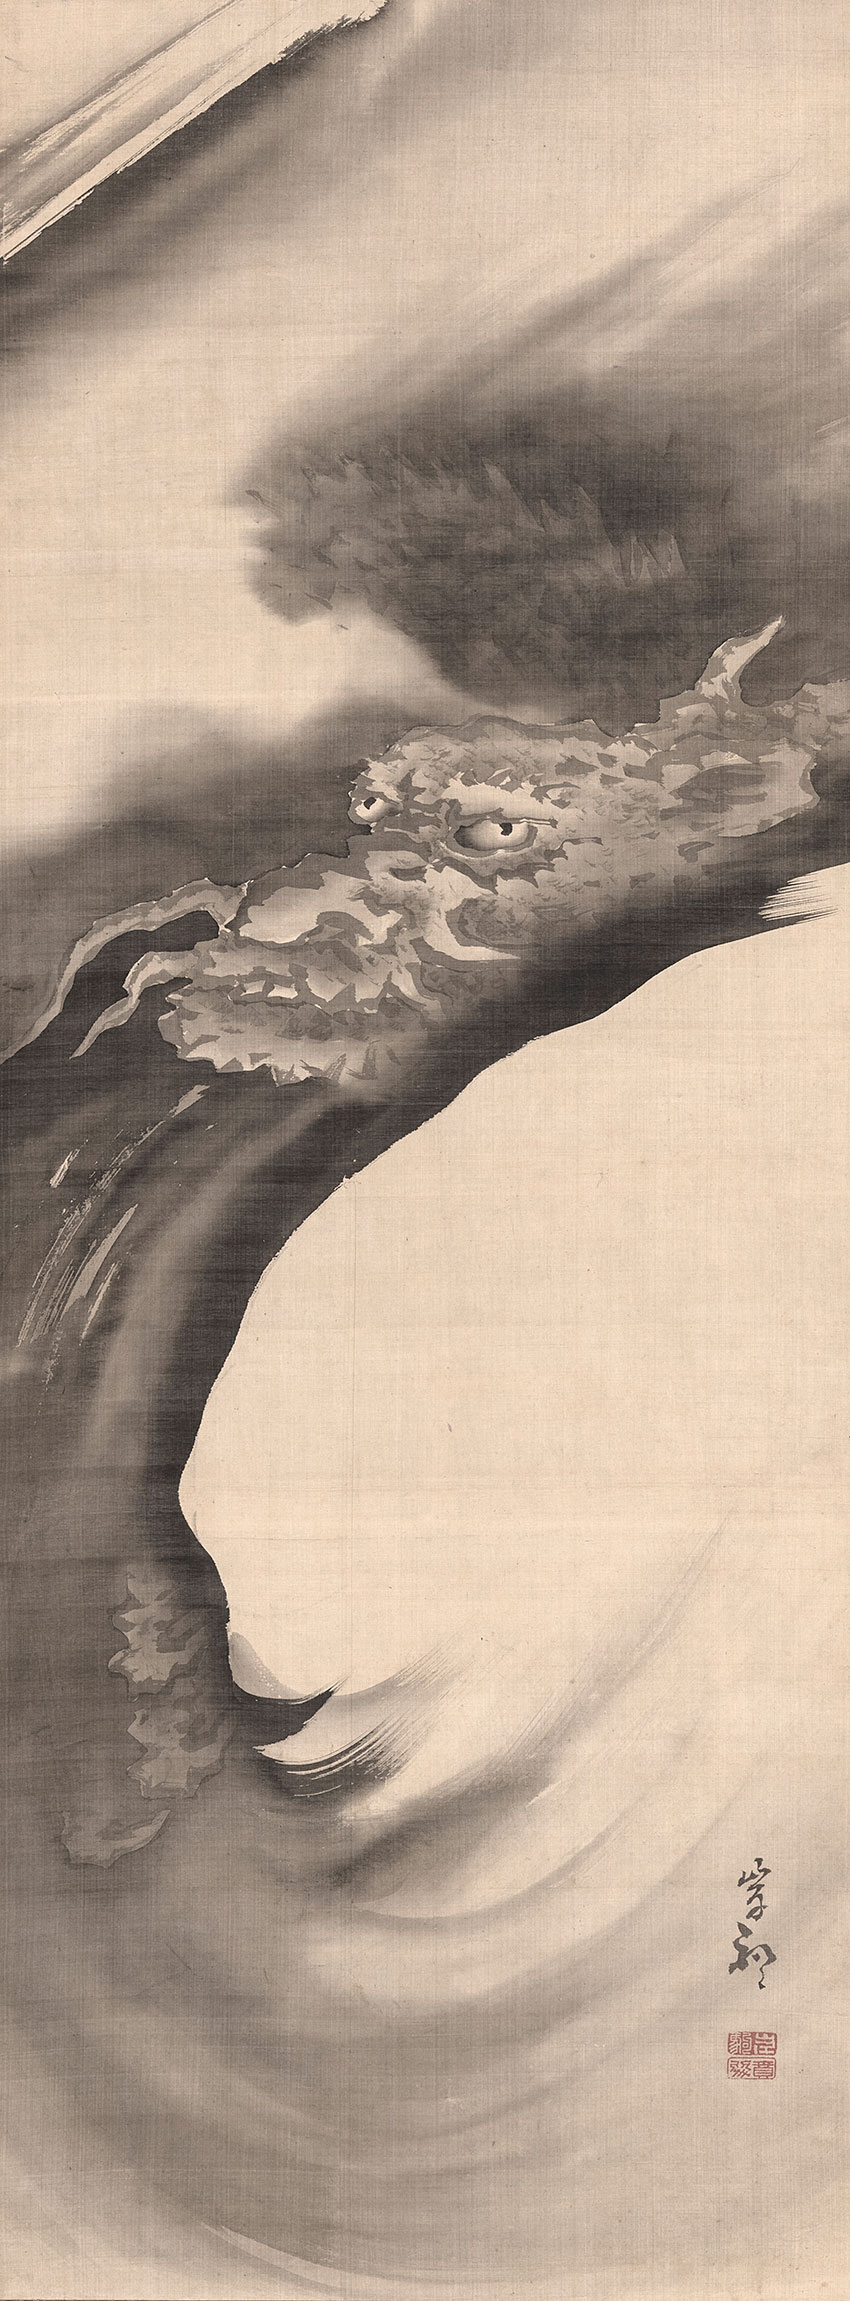 Kishi Ganku. Kyoto, 1749 o 1756-1839. A dragon, in two of its typical elements, the waves, where dragons live, and the clouds, 1785-1808. Painting in shades of ink on silk, 95,5 x 35,4 cm_RET